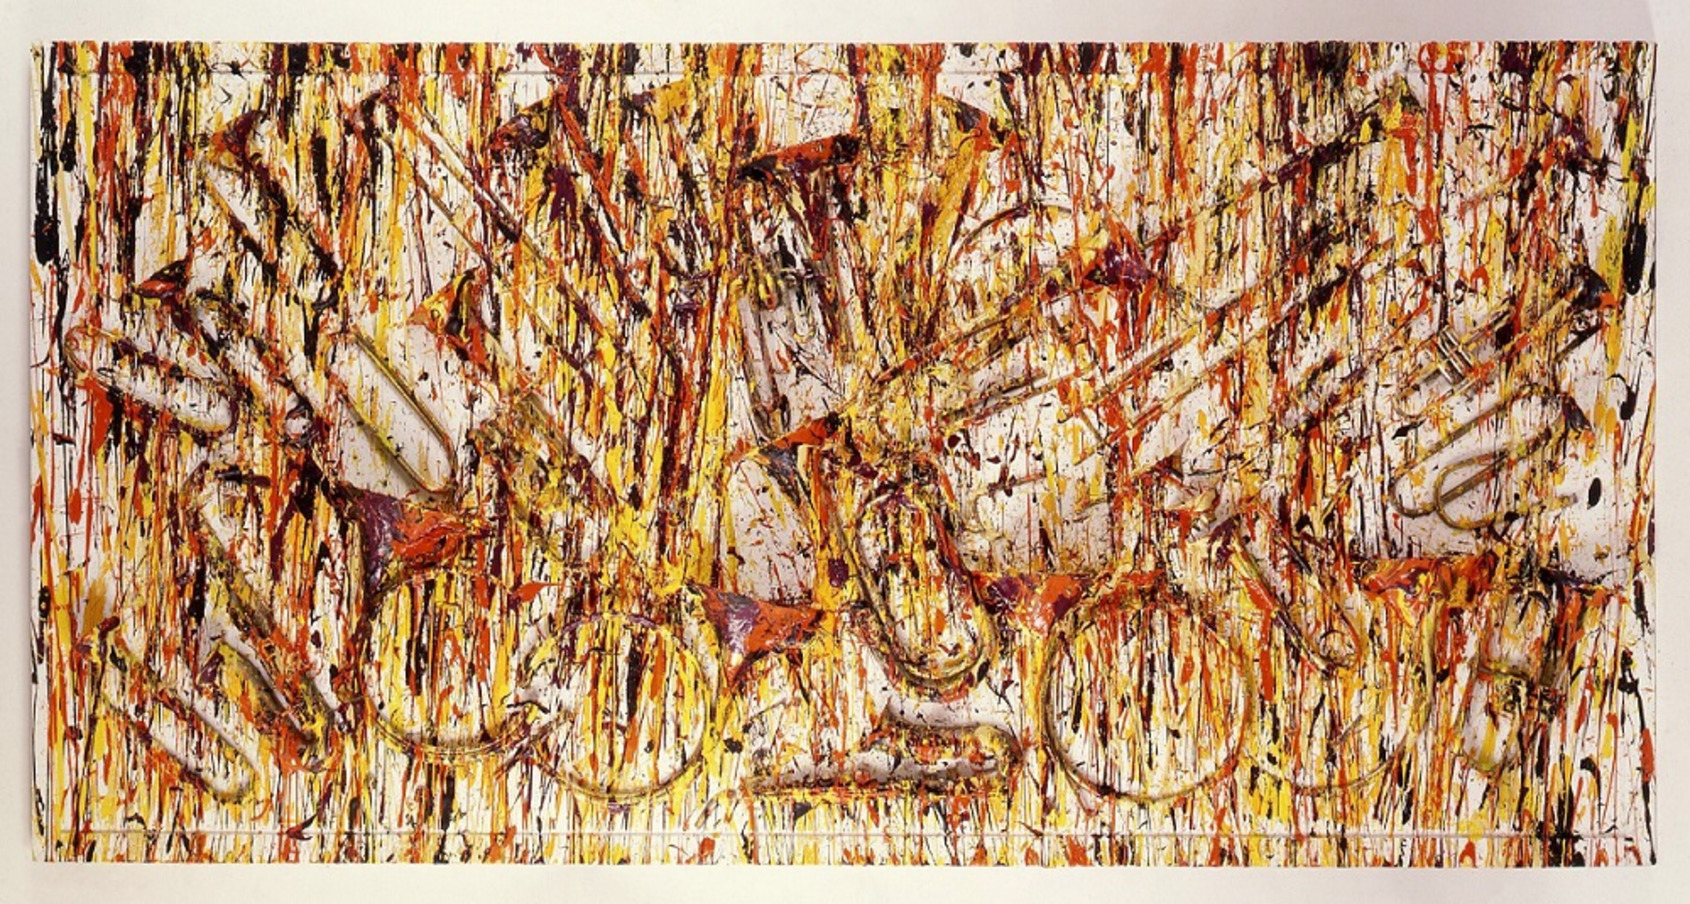 Fanfare sous le Feu, Arman, 1989, 160x315cm. Sliced and broken brass musical instruments with acrylic paint on canvas. Colors: red, blue, green, orange, purple, yellow, brown, and white(canvas). Courtesy of The Arman Marital Trust. 